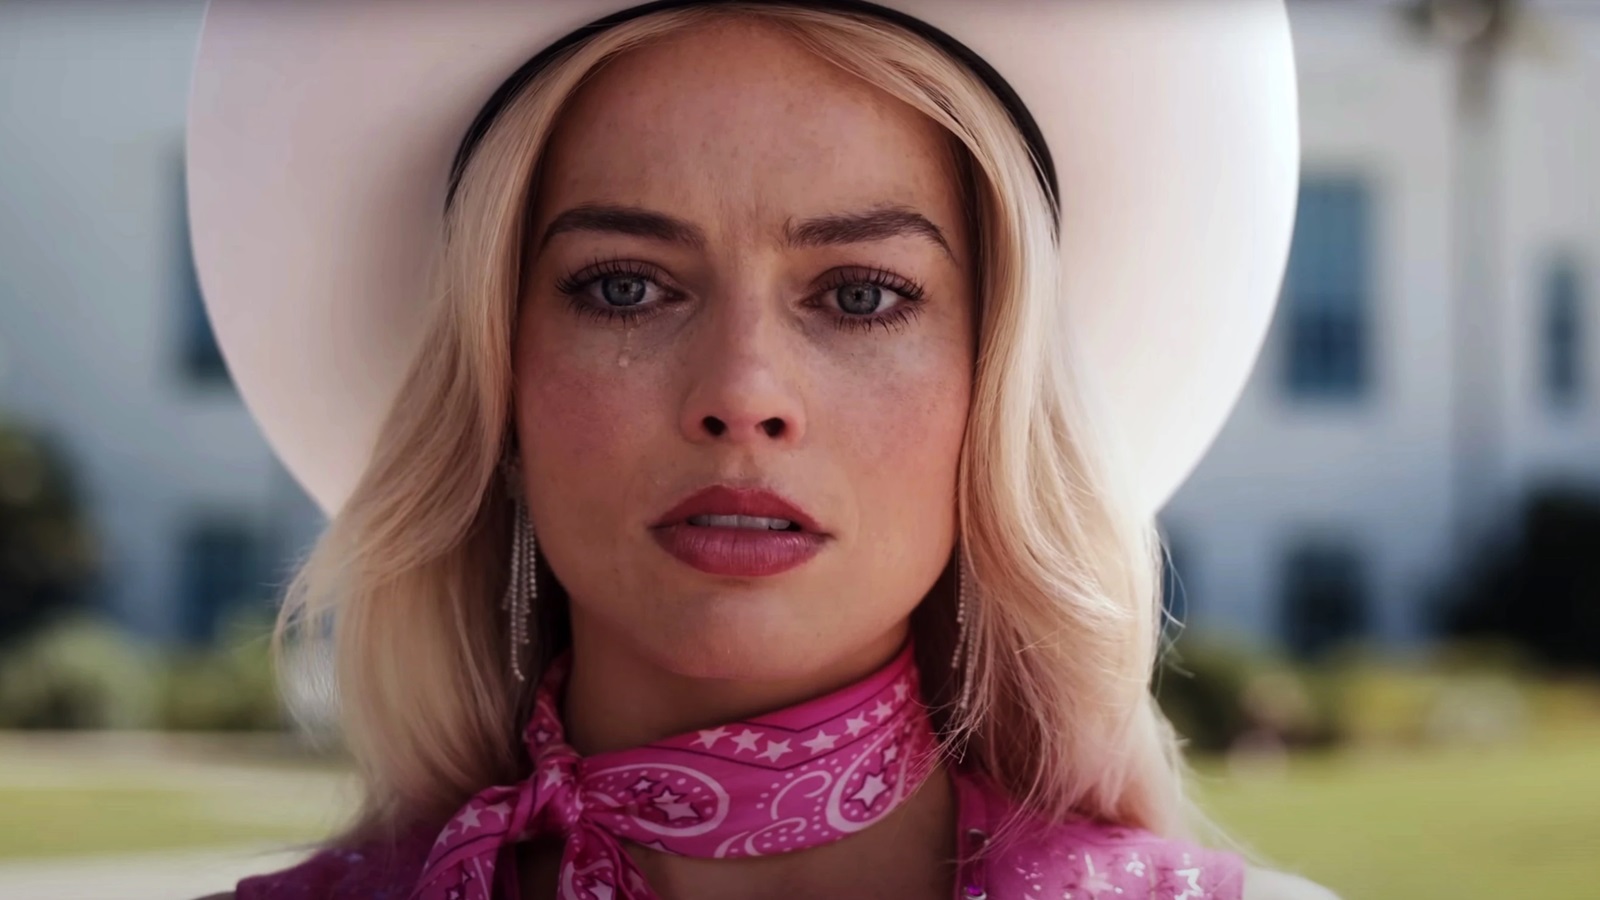 Barbie 2, Margot Robbie excludes a continuation of the story: 'I can't imagine a sequel'